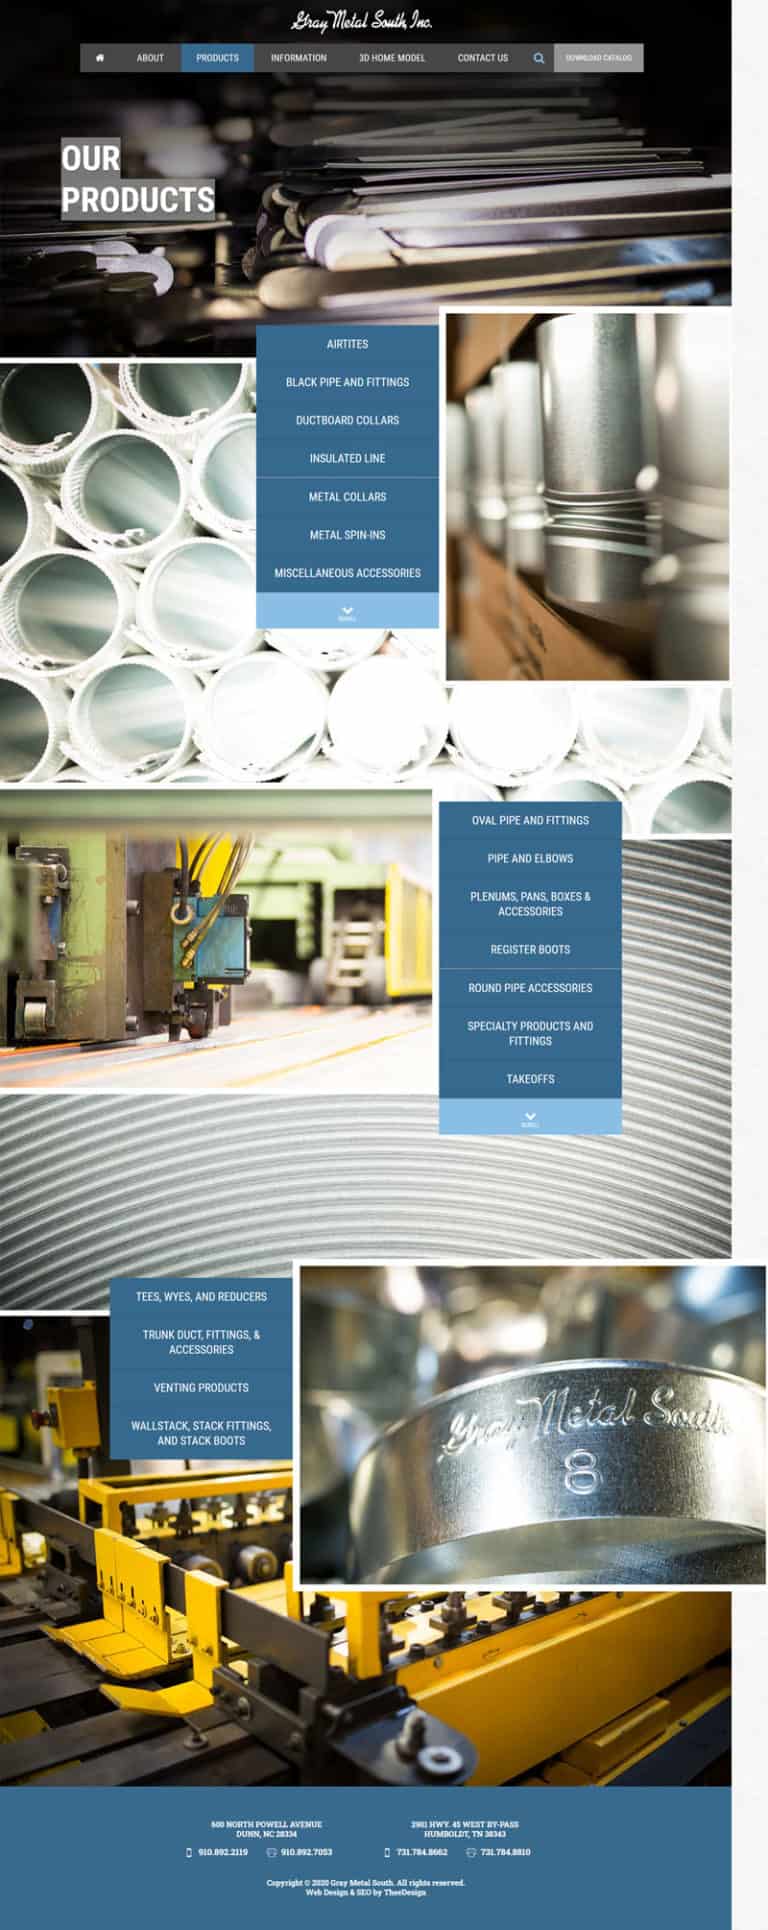 marketing firm creates customized website for HVAC piping manufacturer